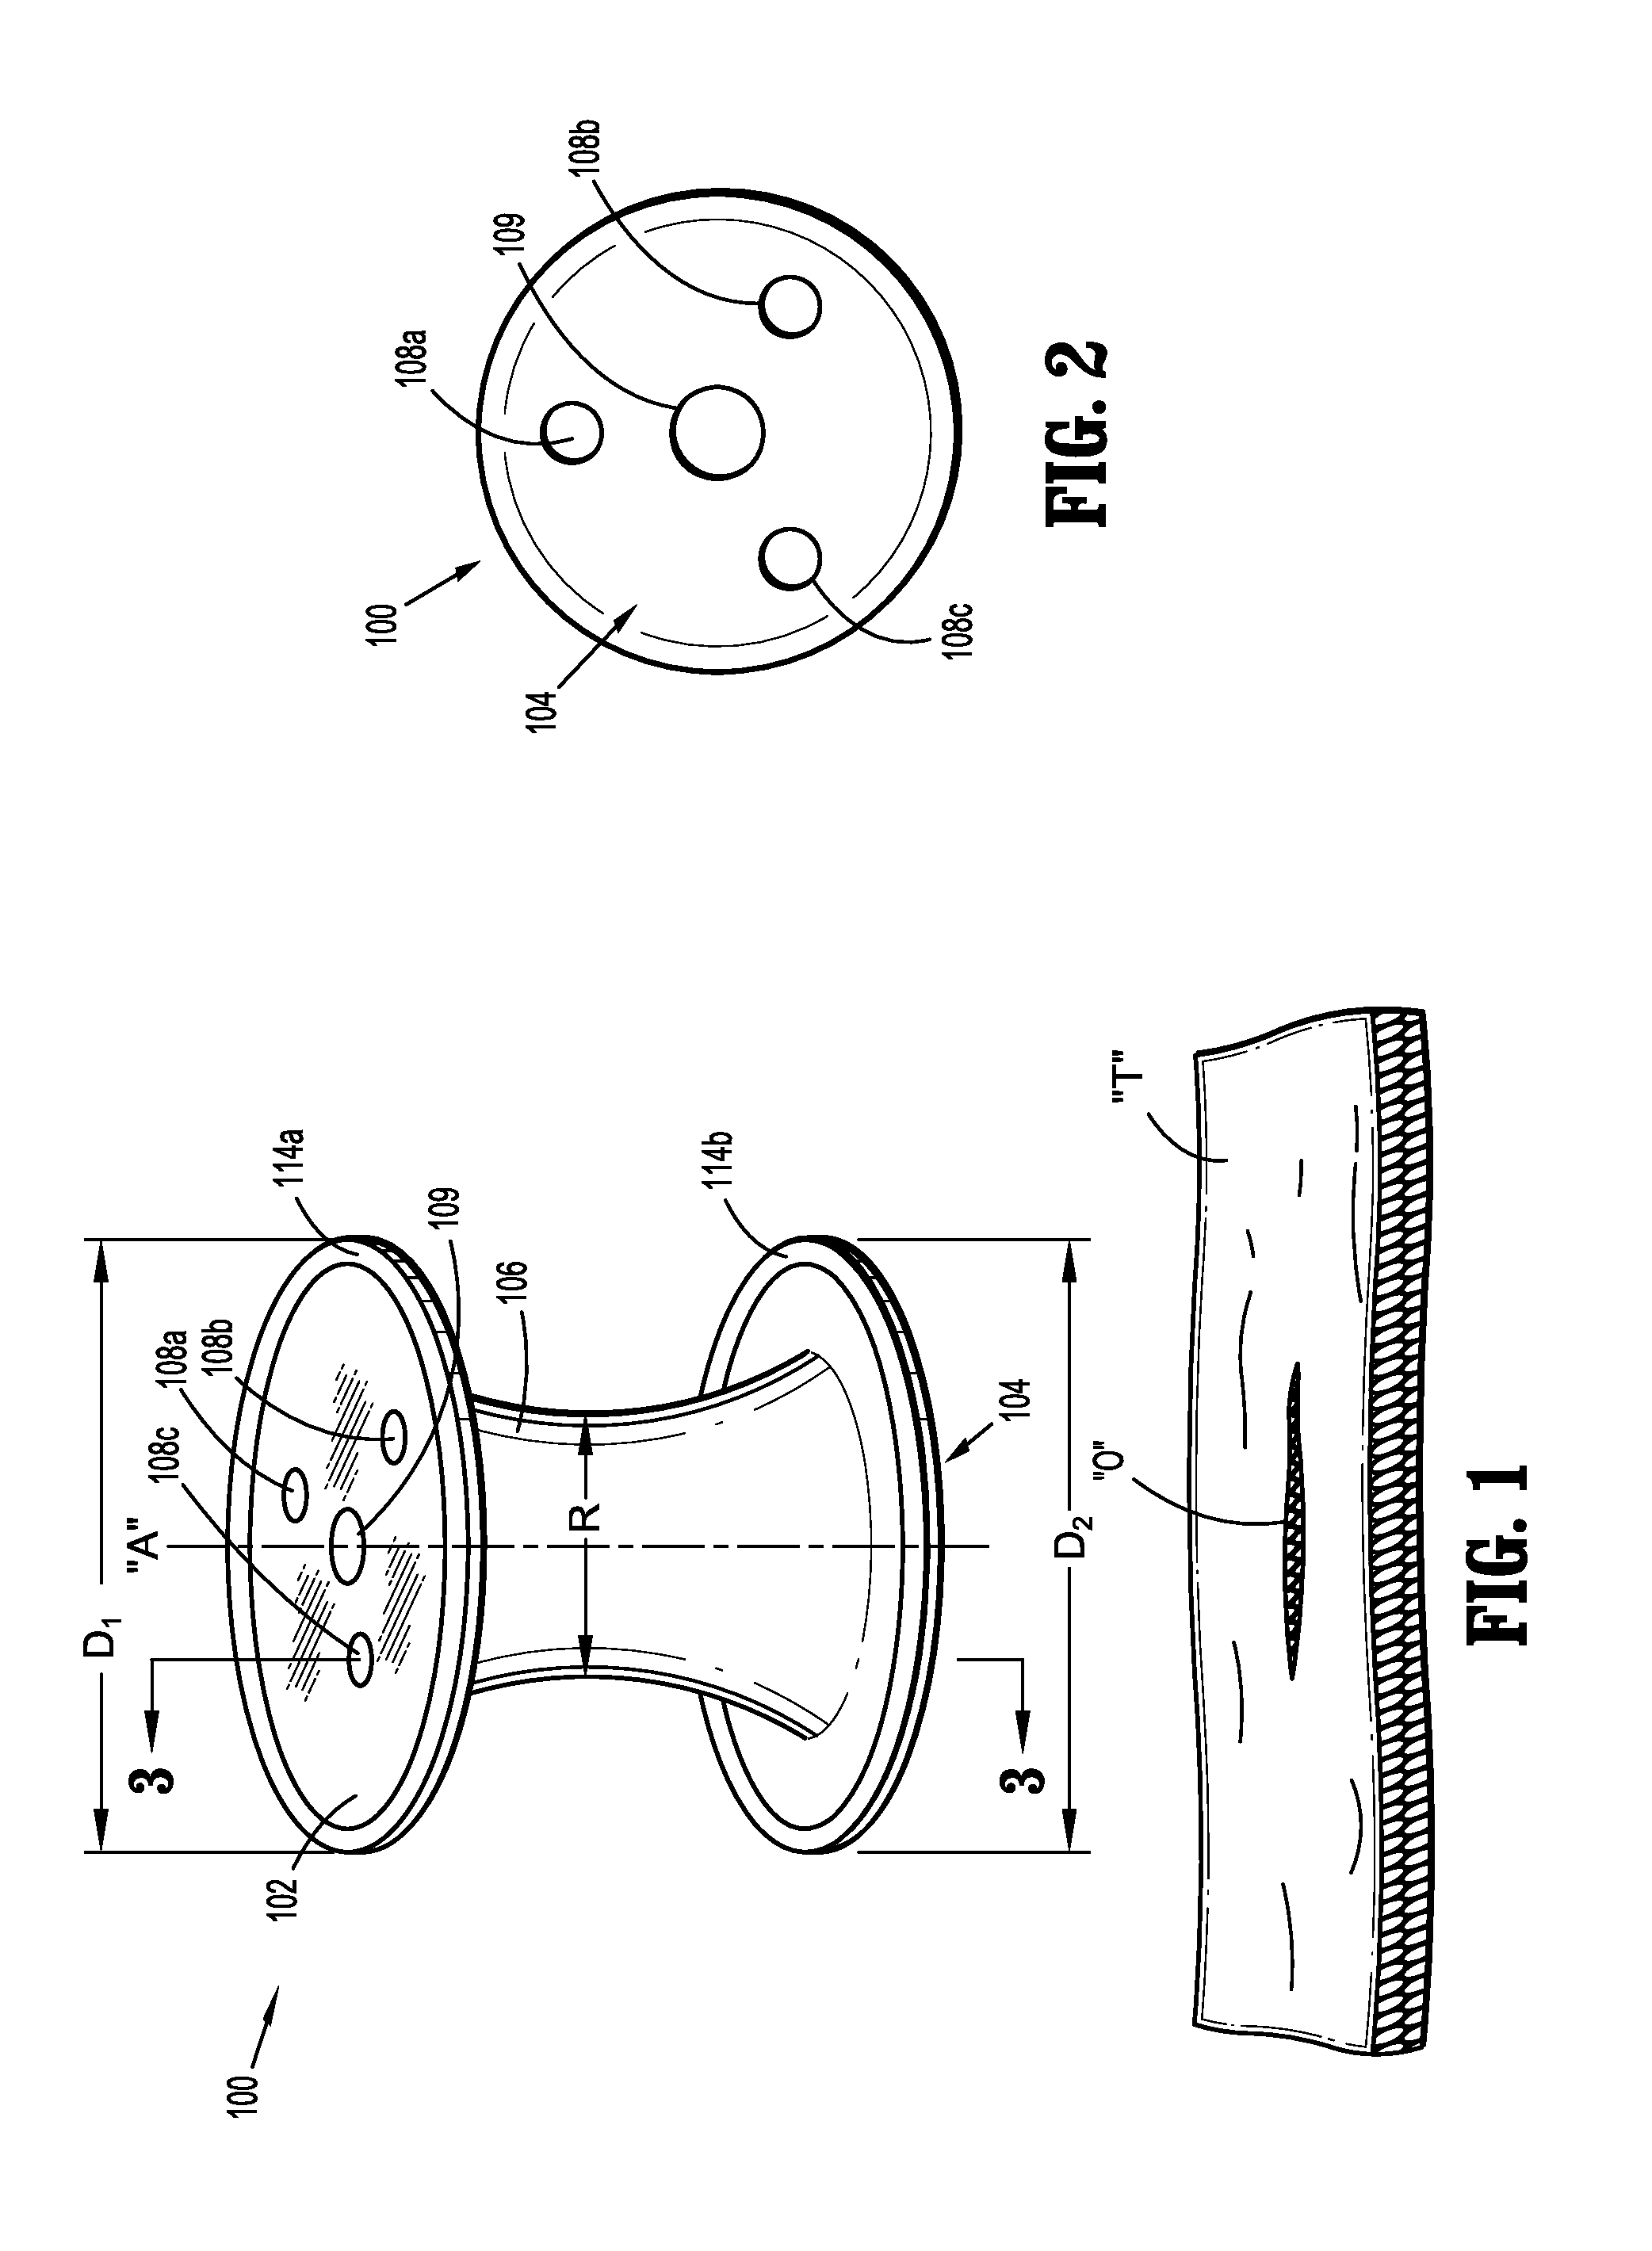 Triangulation mechanism for a minimally invasive surgical device